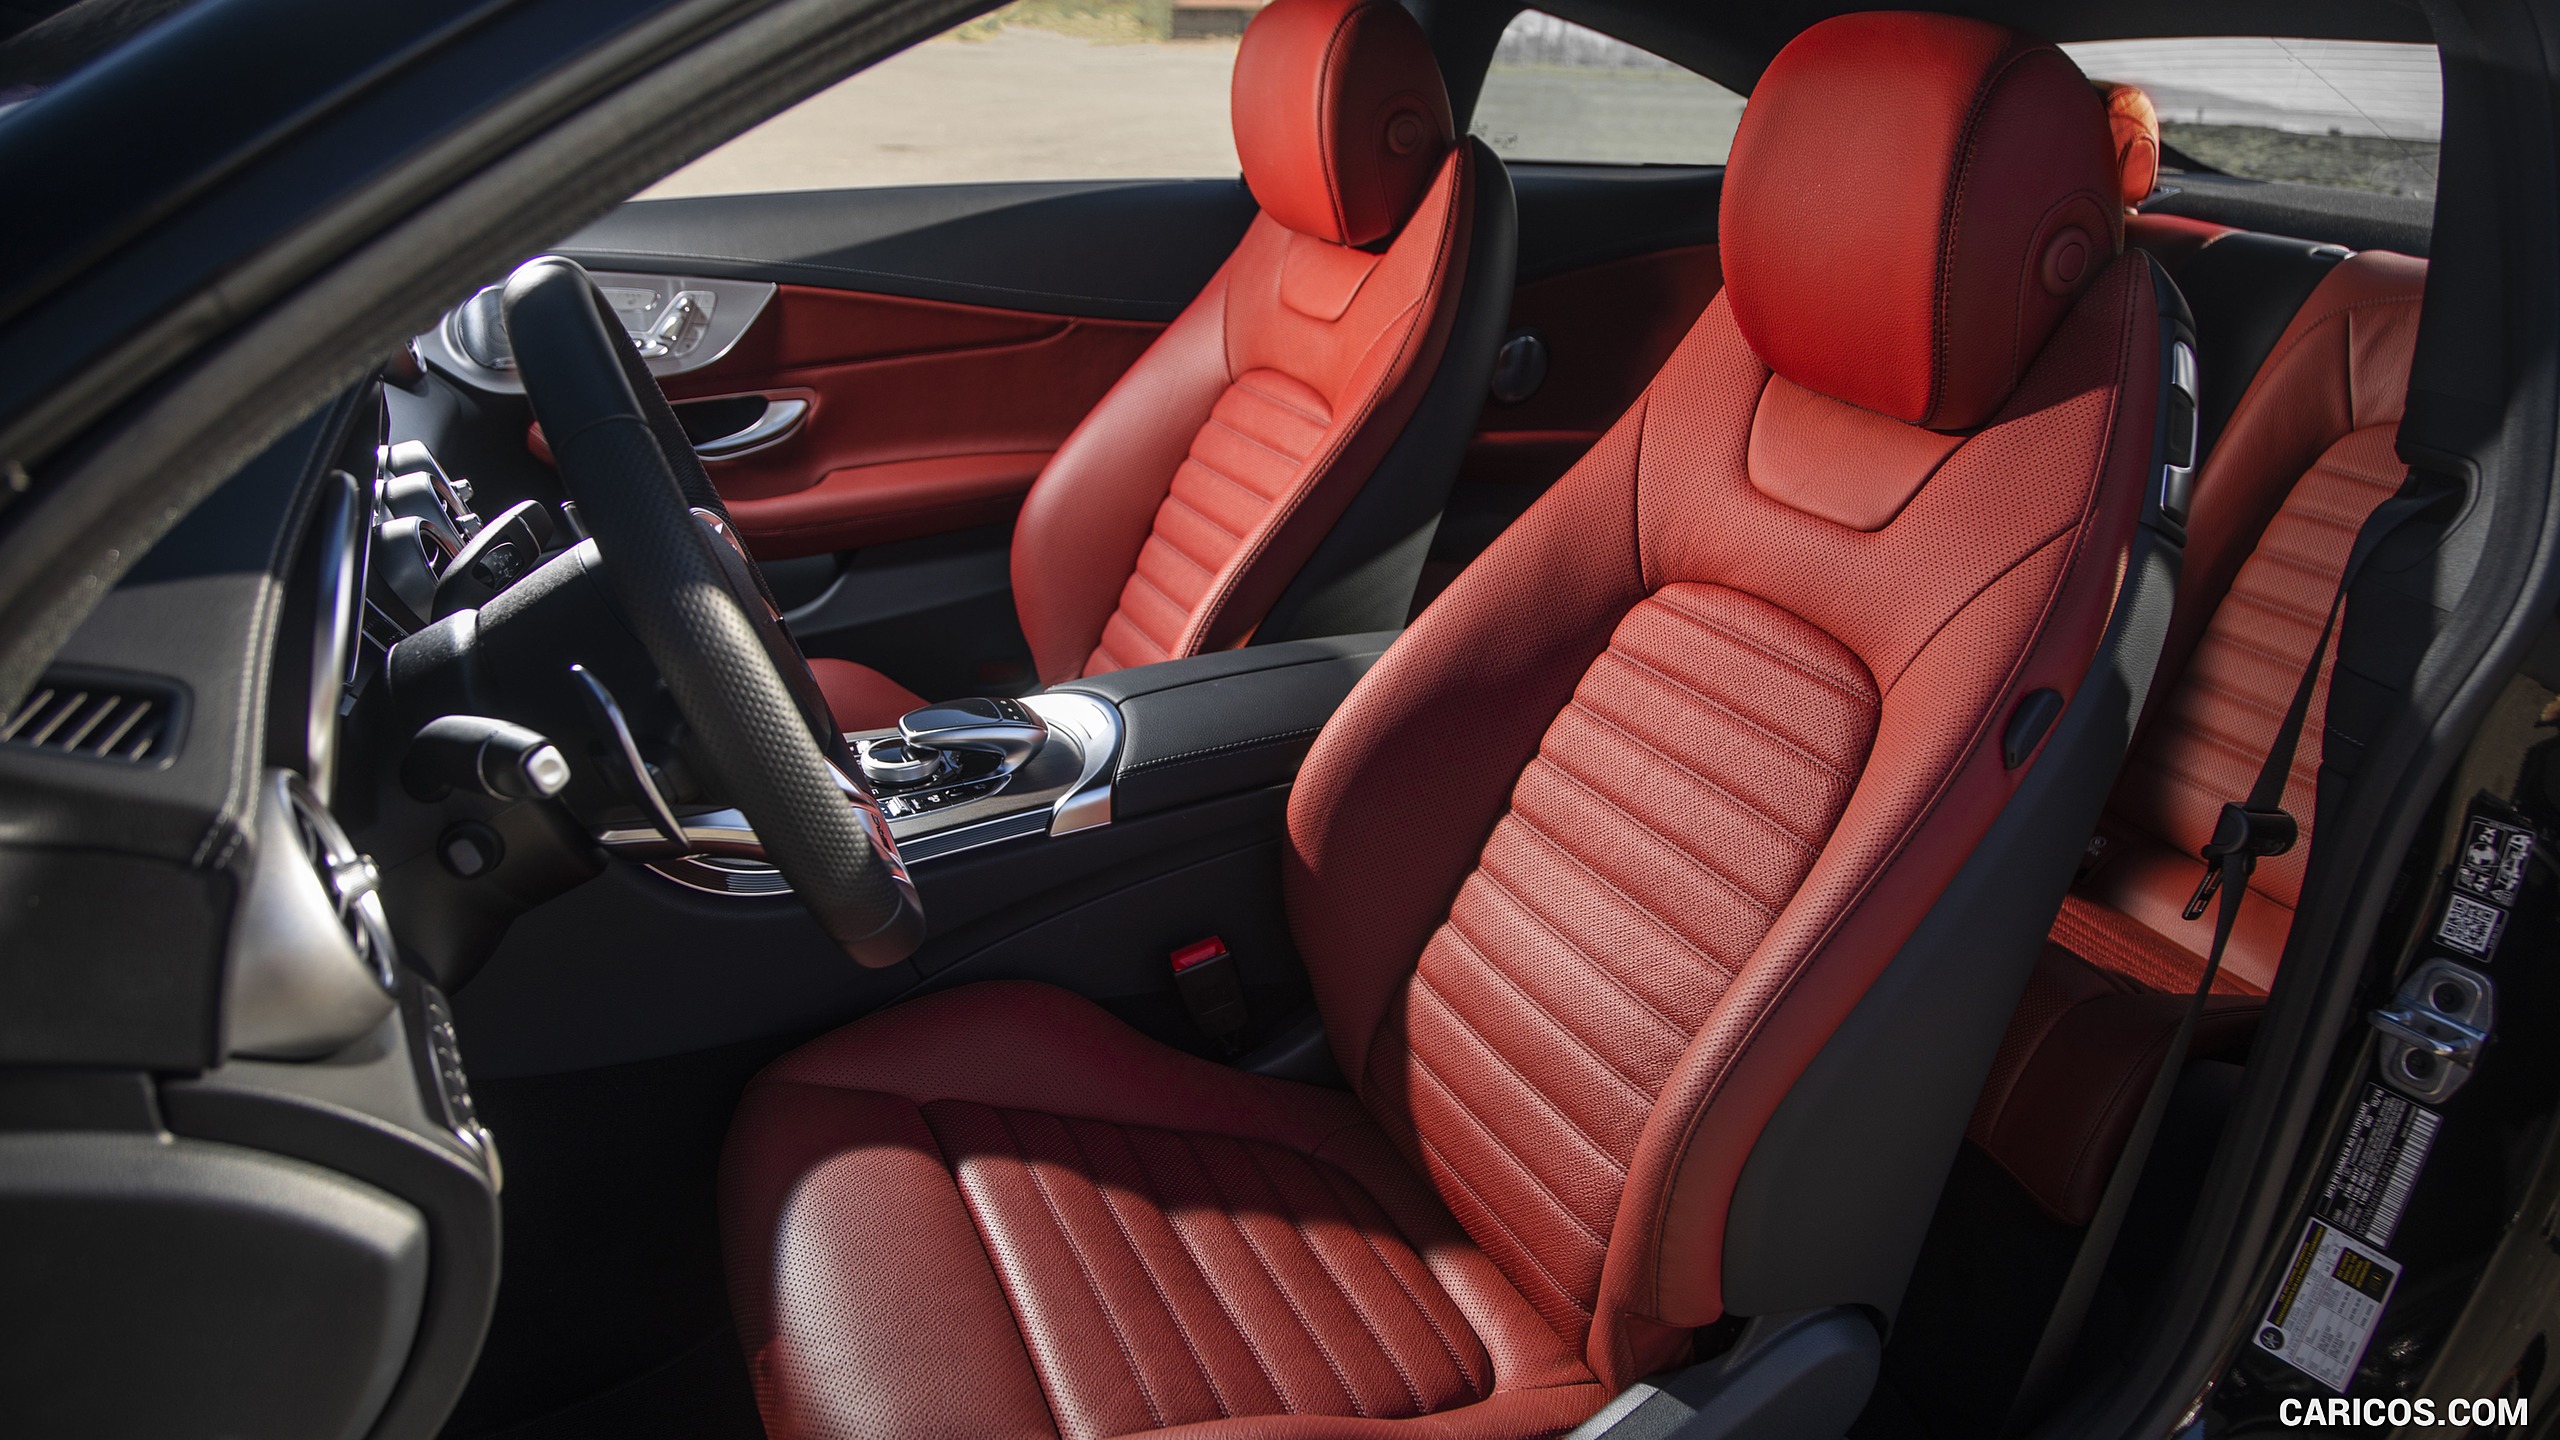 2019 Mercedes-AMG C43 Coupe (US-Spec) - Interior, Front Seats, #183 of 184